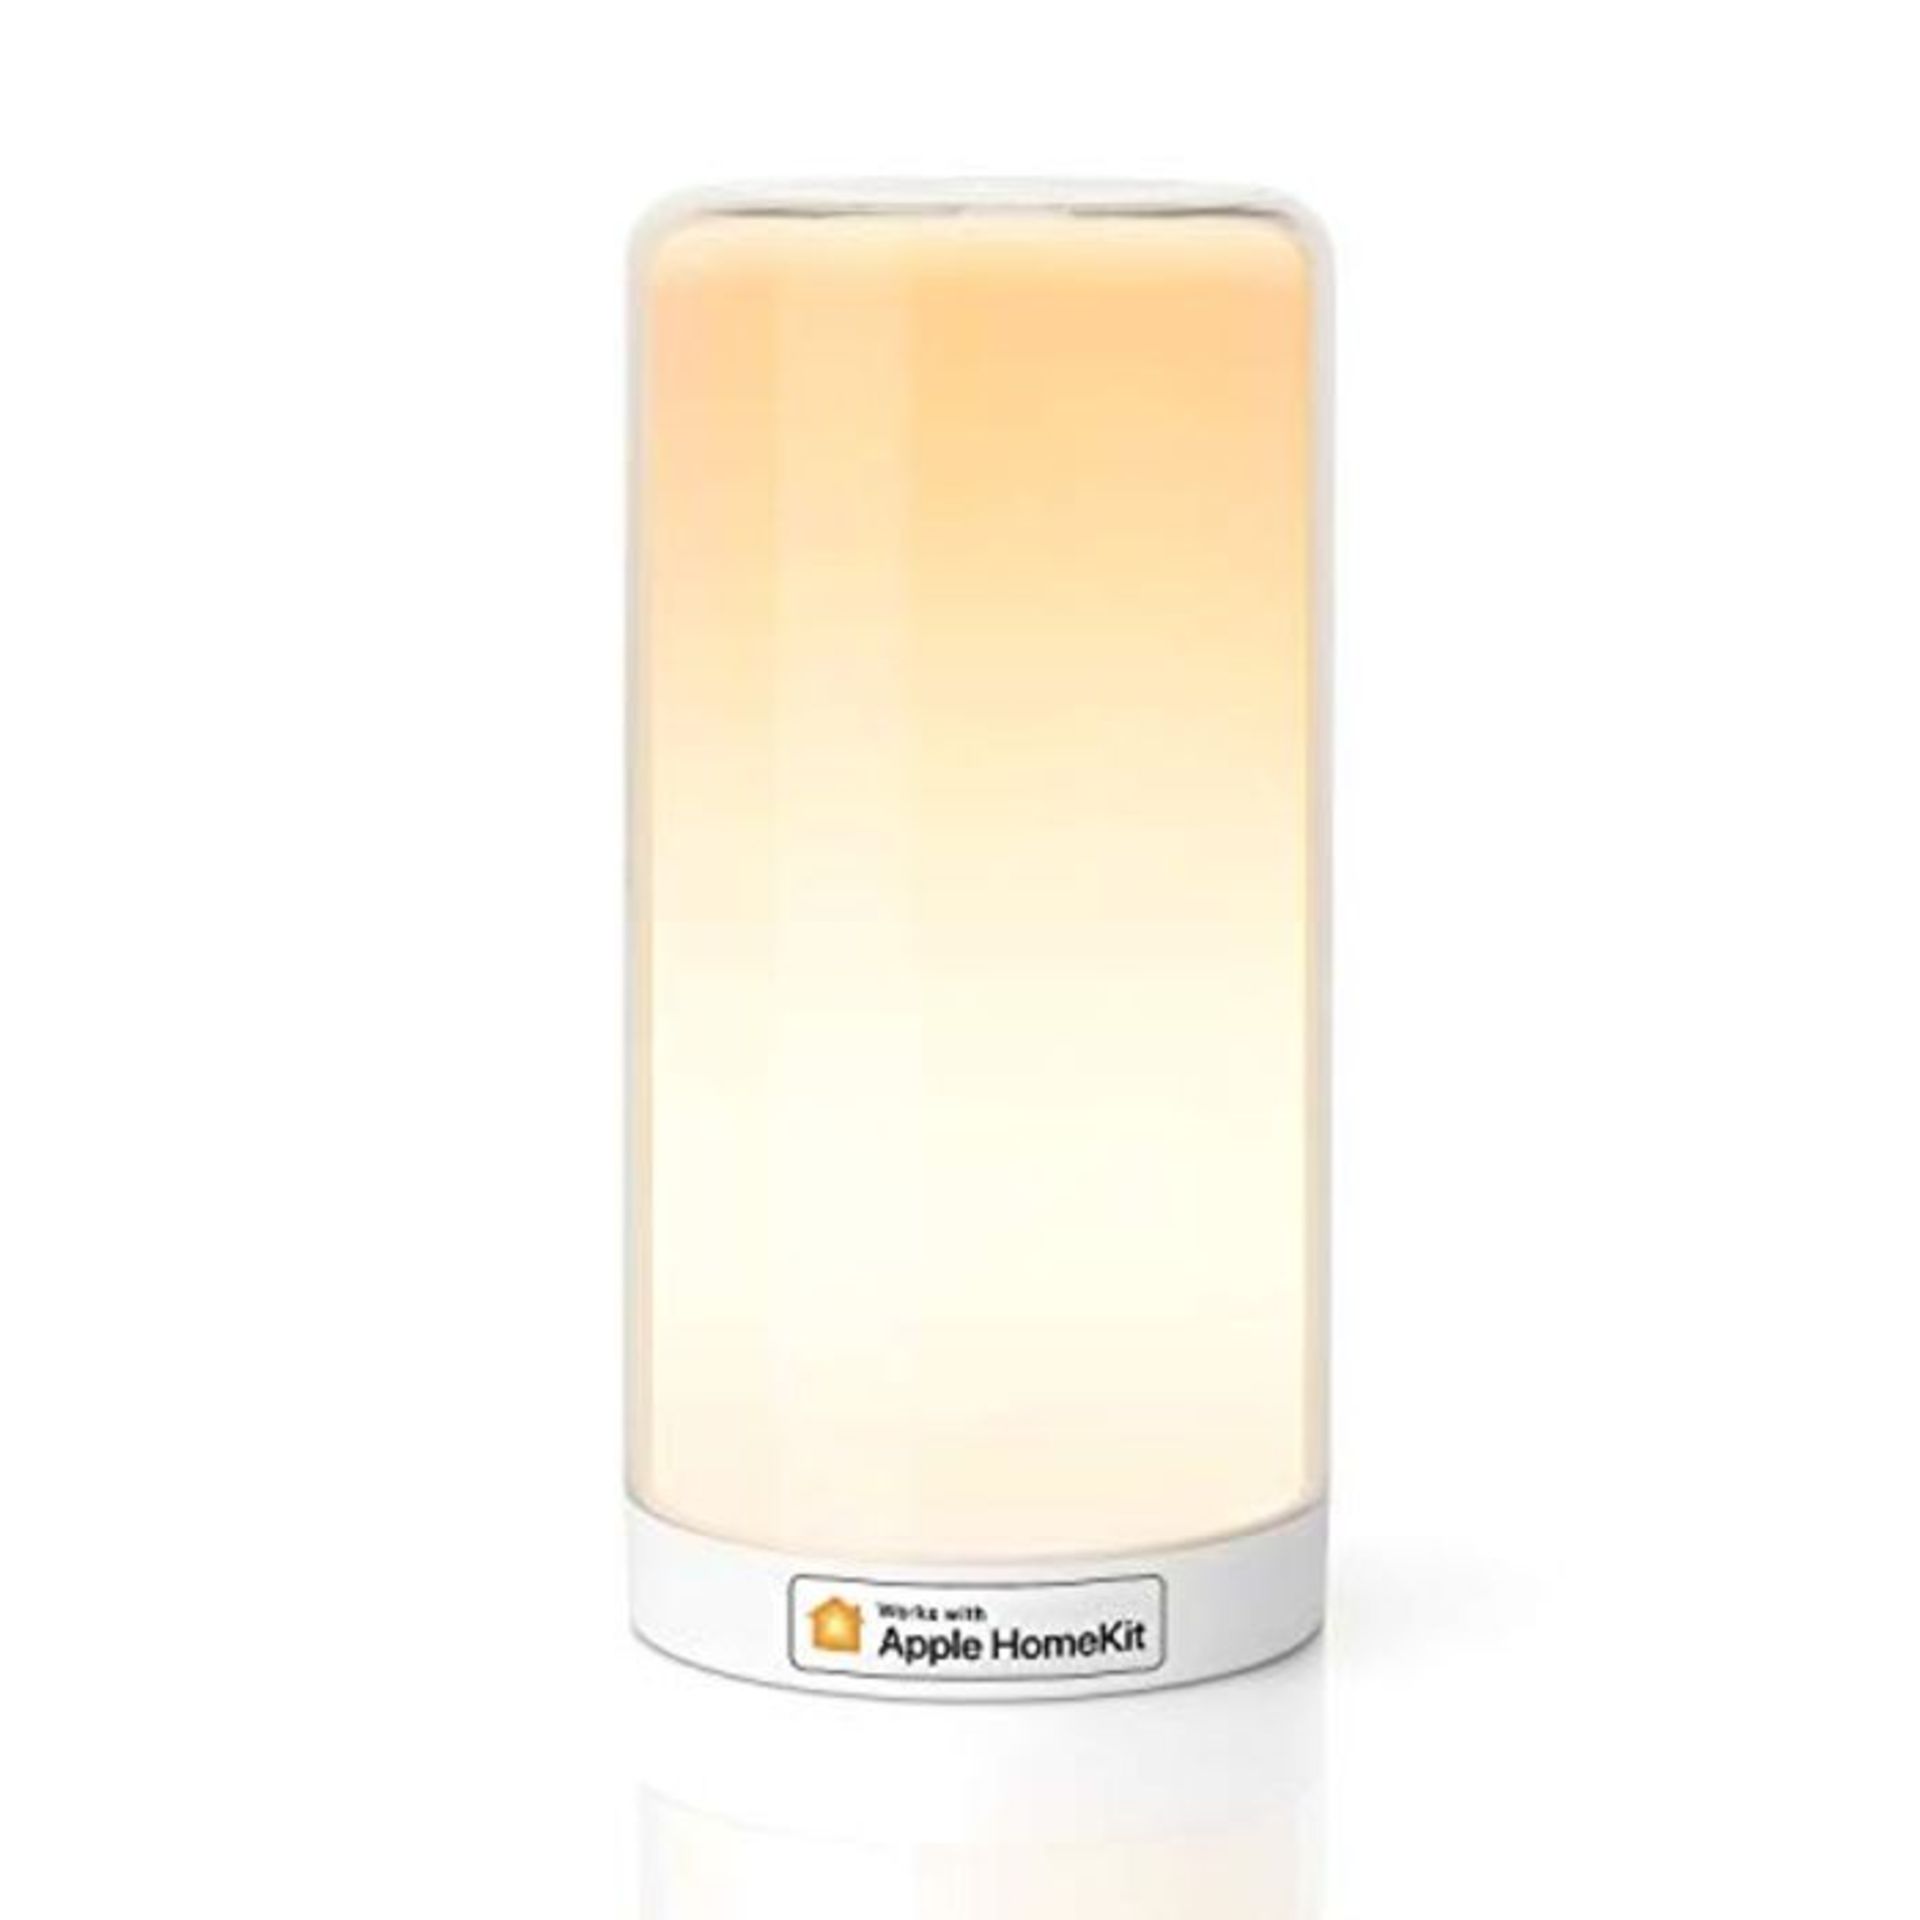 WLAN LED Bedside Lamp Works with Apple HomeKit, Meross Atmosphere Touch Table Lamp for